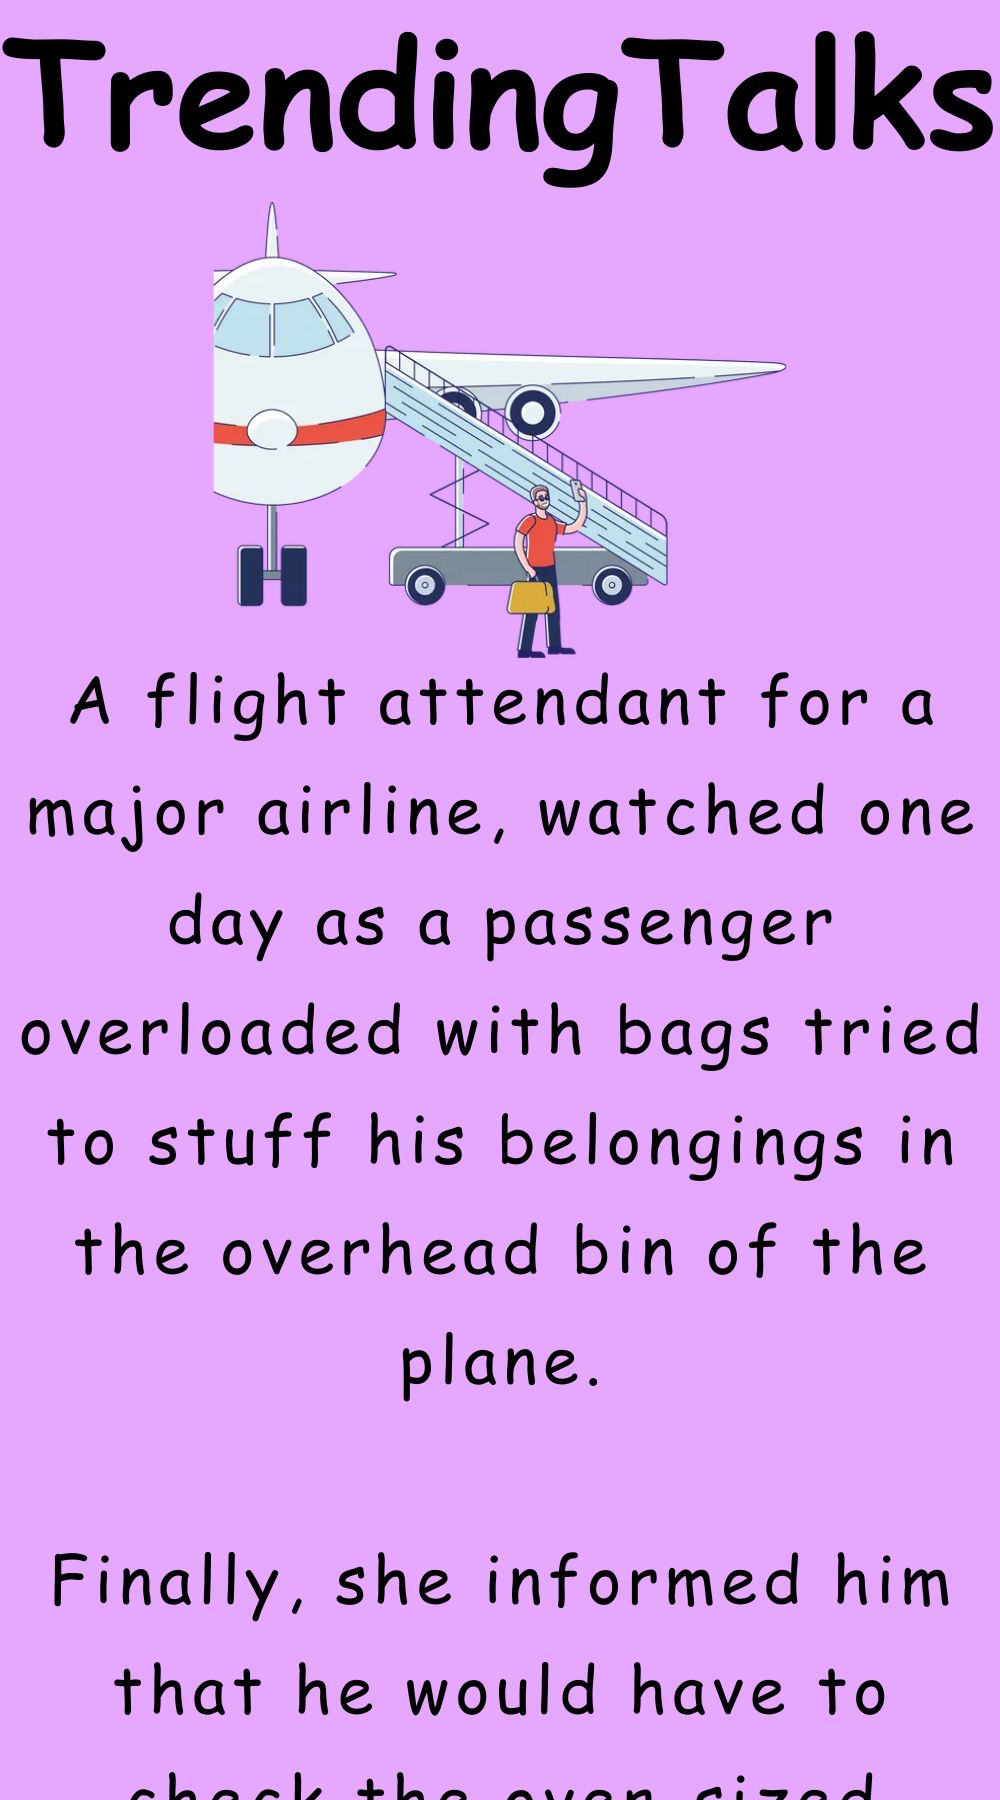 A flight attendant for a major airline